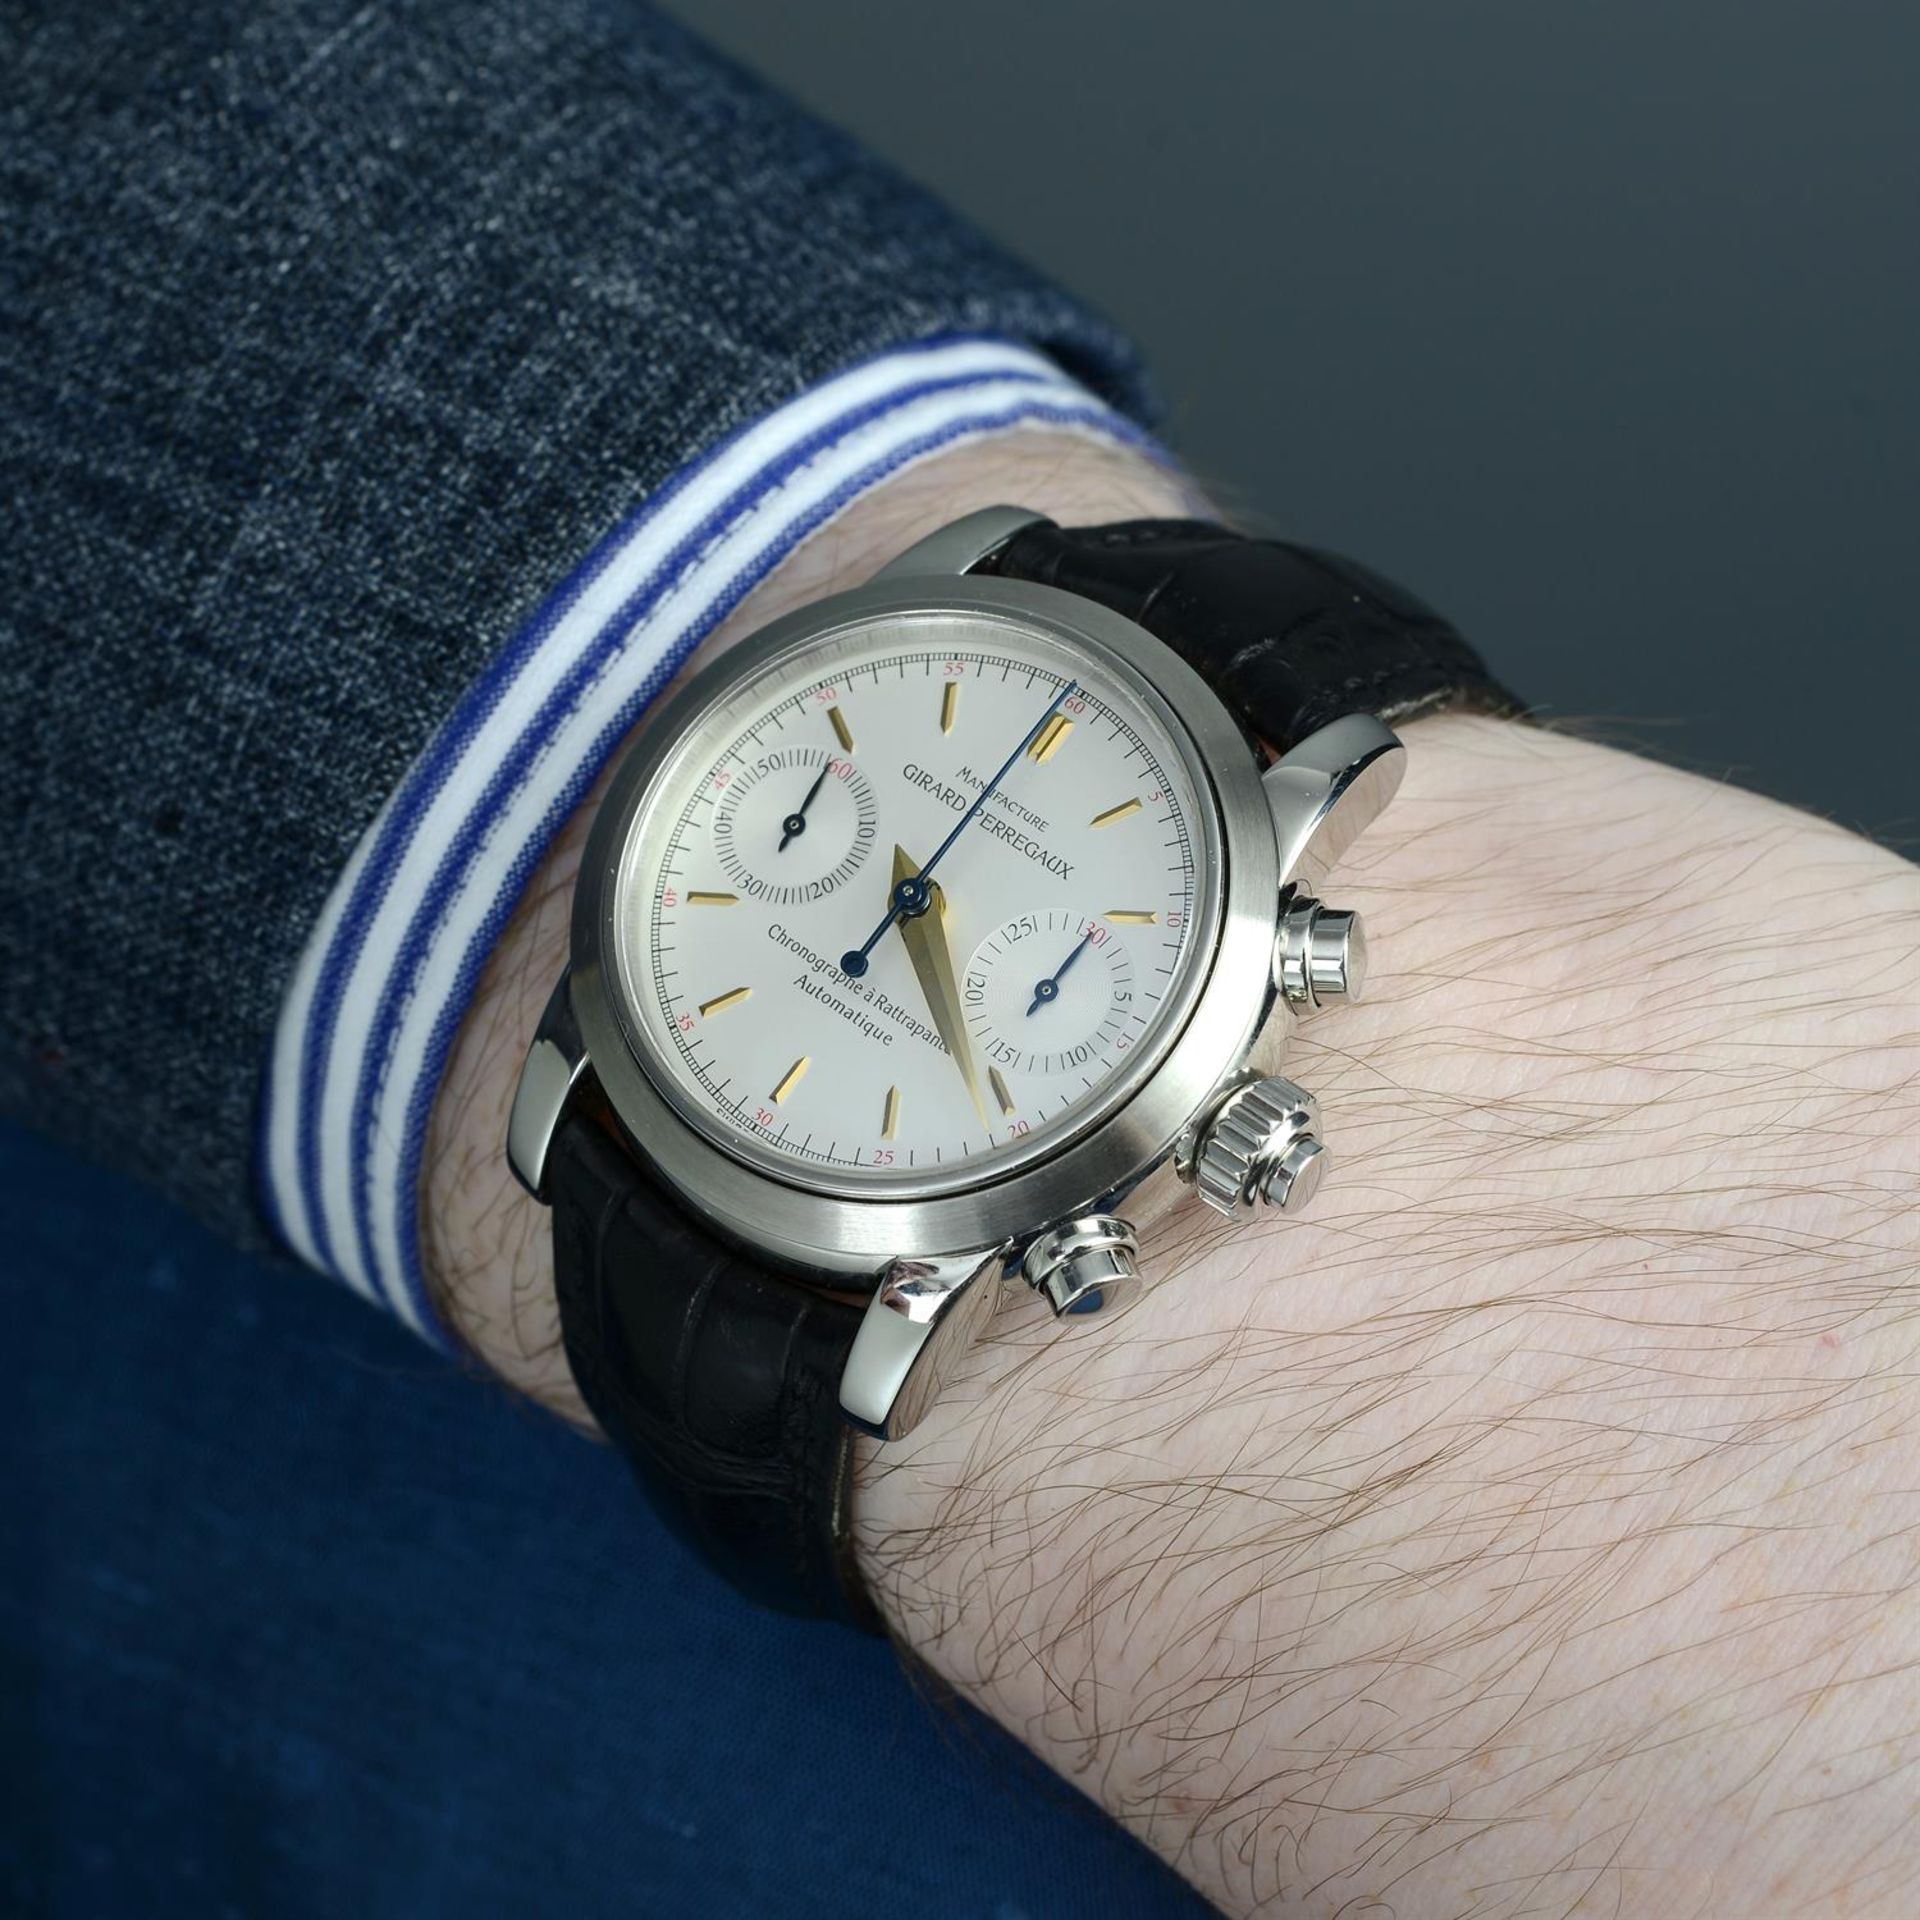 GIRARD-PERREGAUX - a stainless steel Chronographe à Rattrapante wrist watch, 38mm. - Image 5 of 6